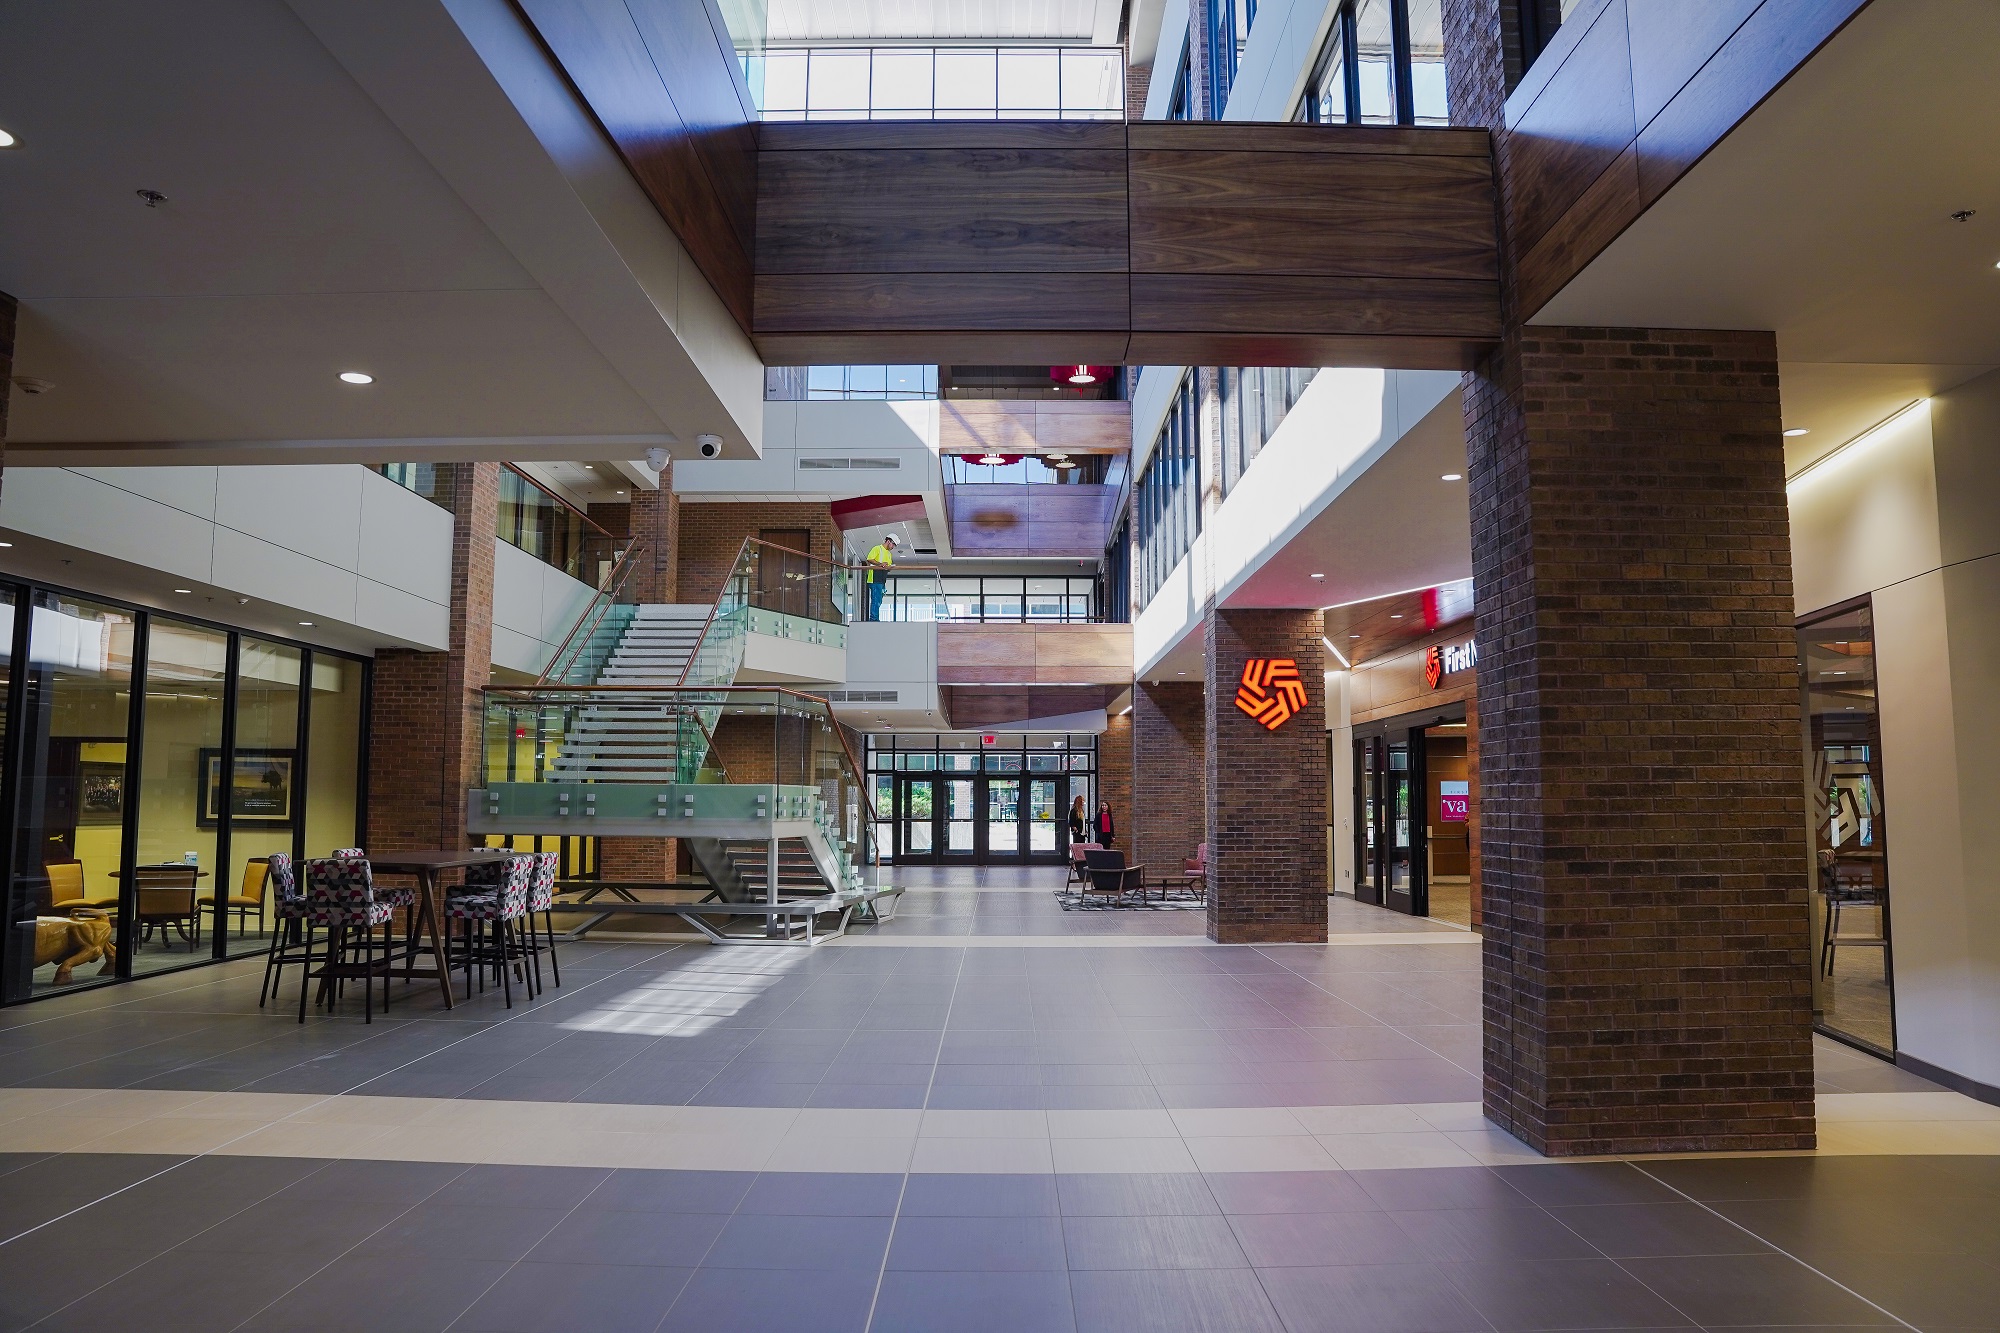 A view of the remodeled atrium at First National Bank.